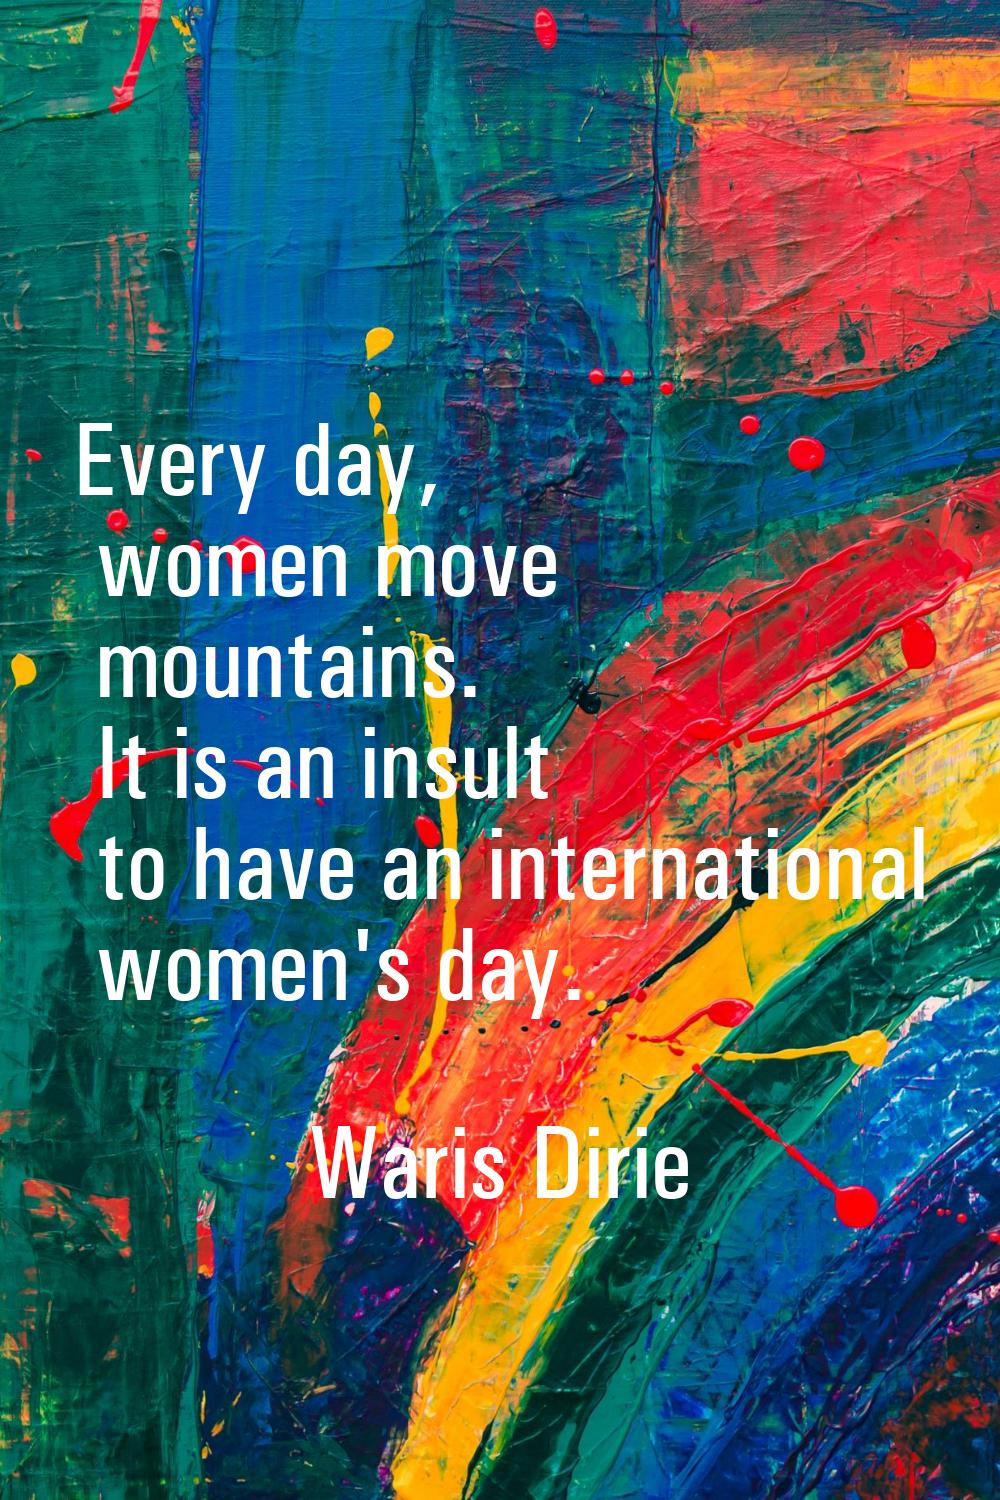 Every day, women move mountains. It is an insult to have an international women's day.